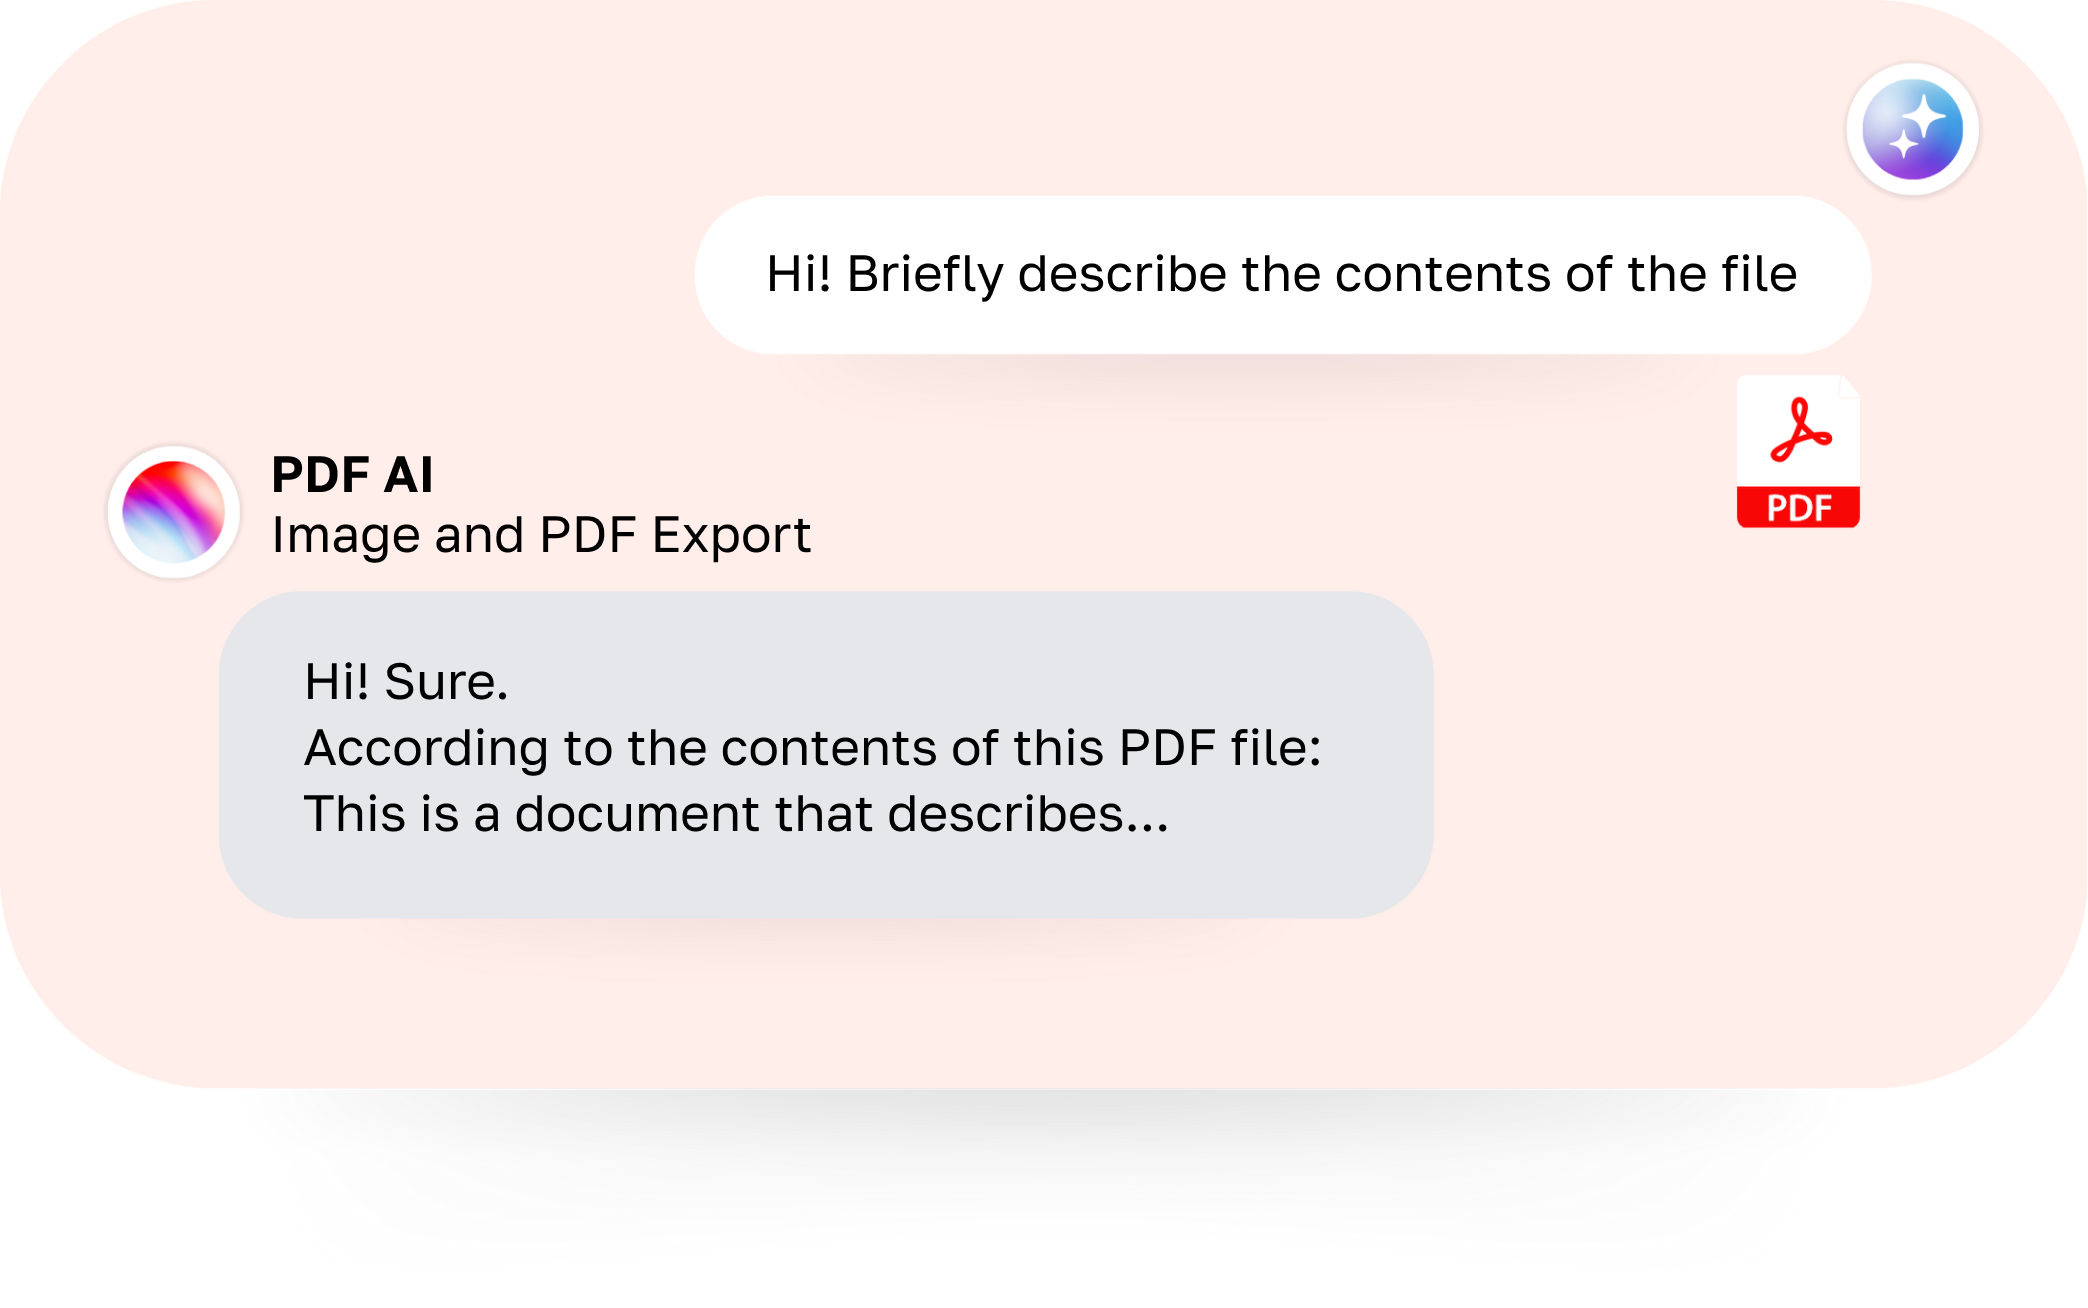 Image and PDF Expert